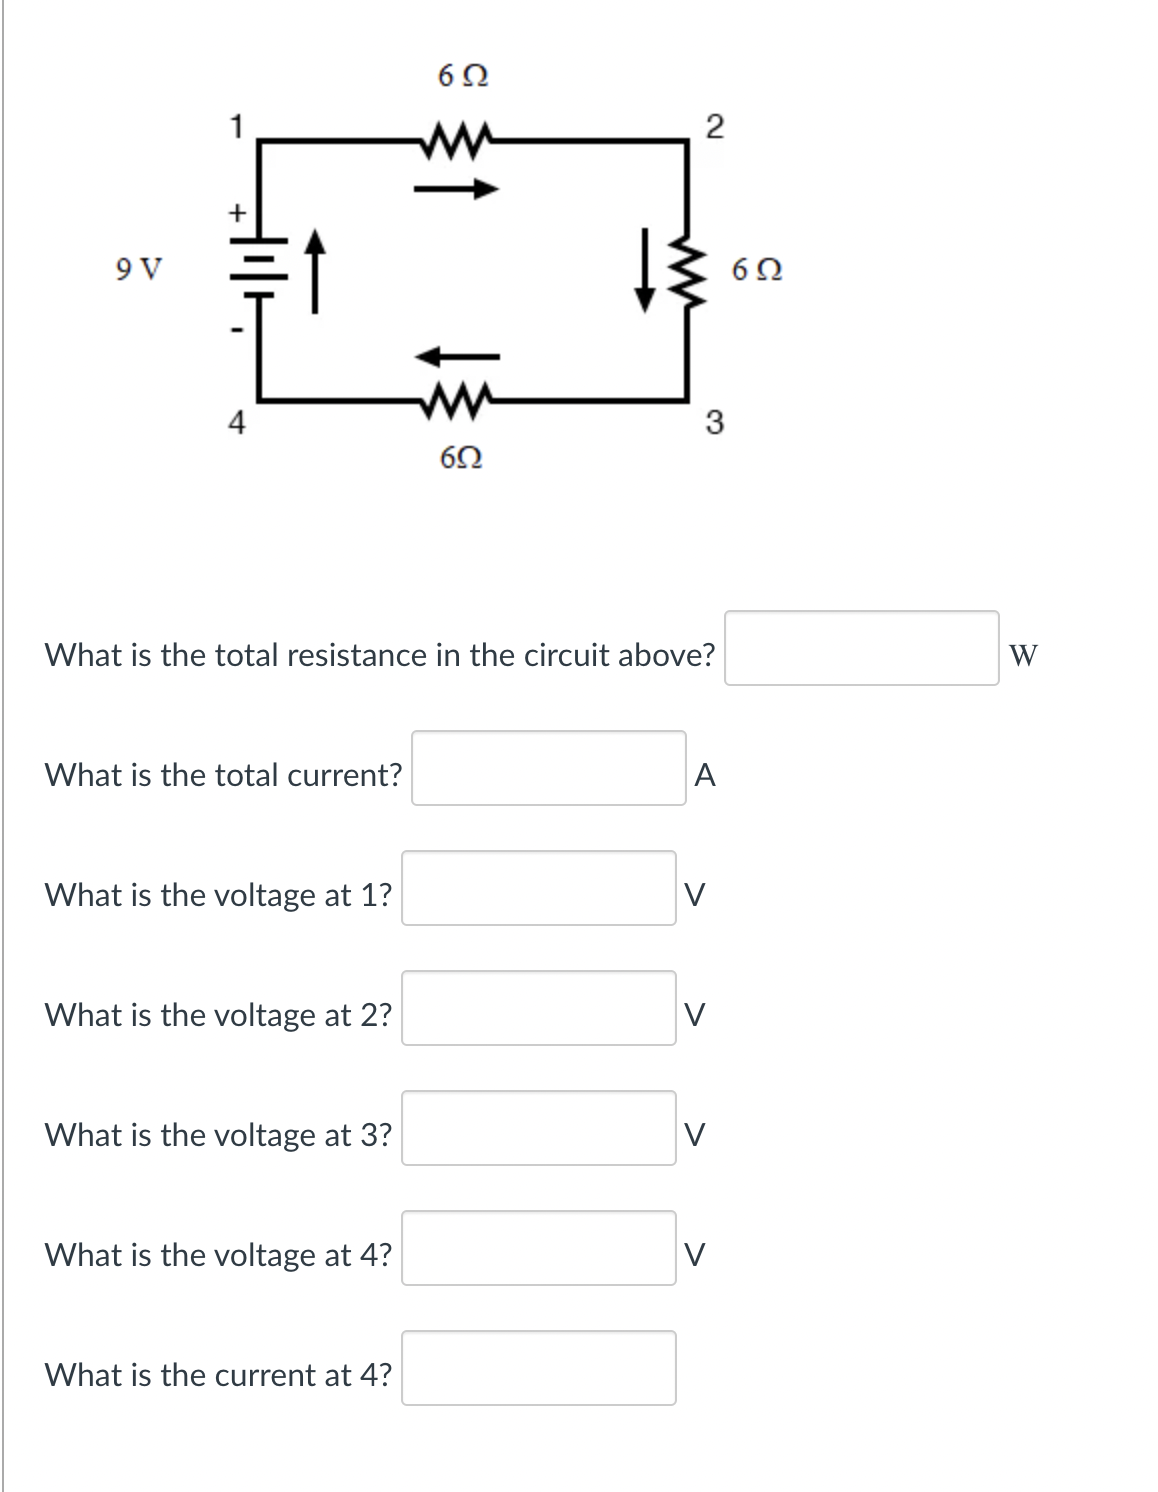 1
+
9 V
6Ω
4
3
What is the total resistance in the circuit above?
W
What is the total current?
A
What is the voltage at 1?
V
What is the voltage at 2?
V
What is the voltage at 3?
V
What is the voltage at 4?
V
What is the current at 4?
2.
1
